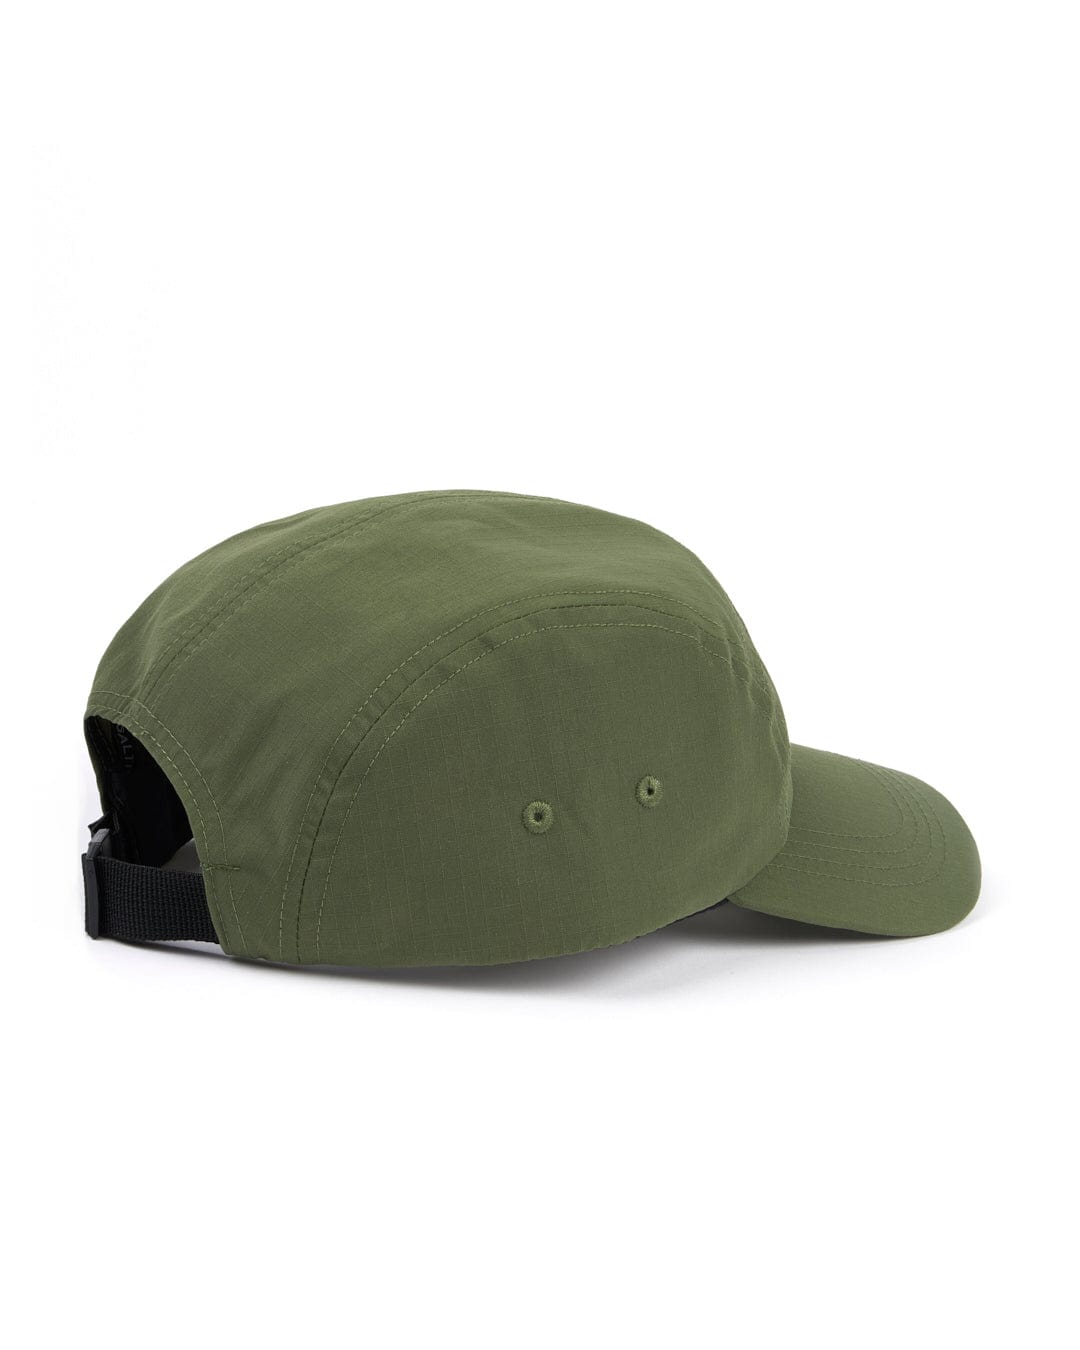 The Saltrock Gaitor 5 Panel UPF Cap - Green features an adjustable strap for a perfect fit.